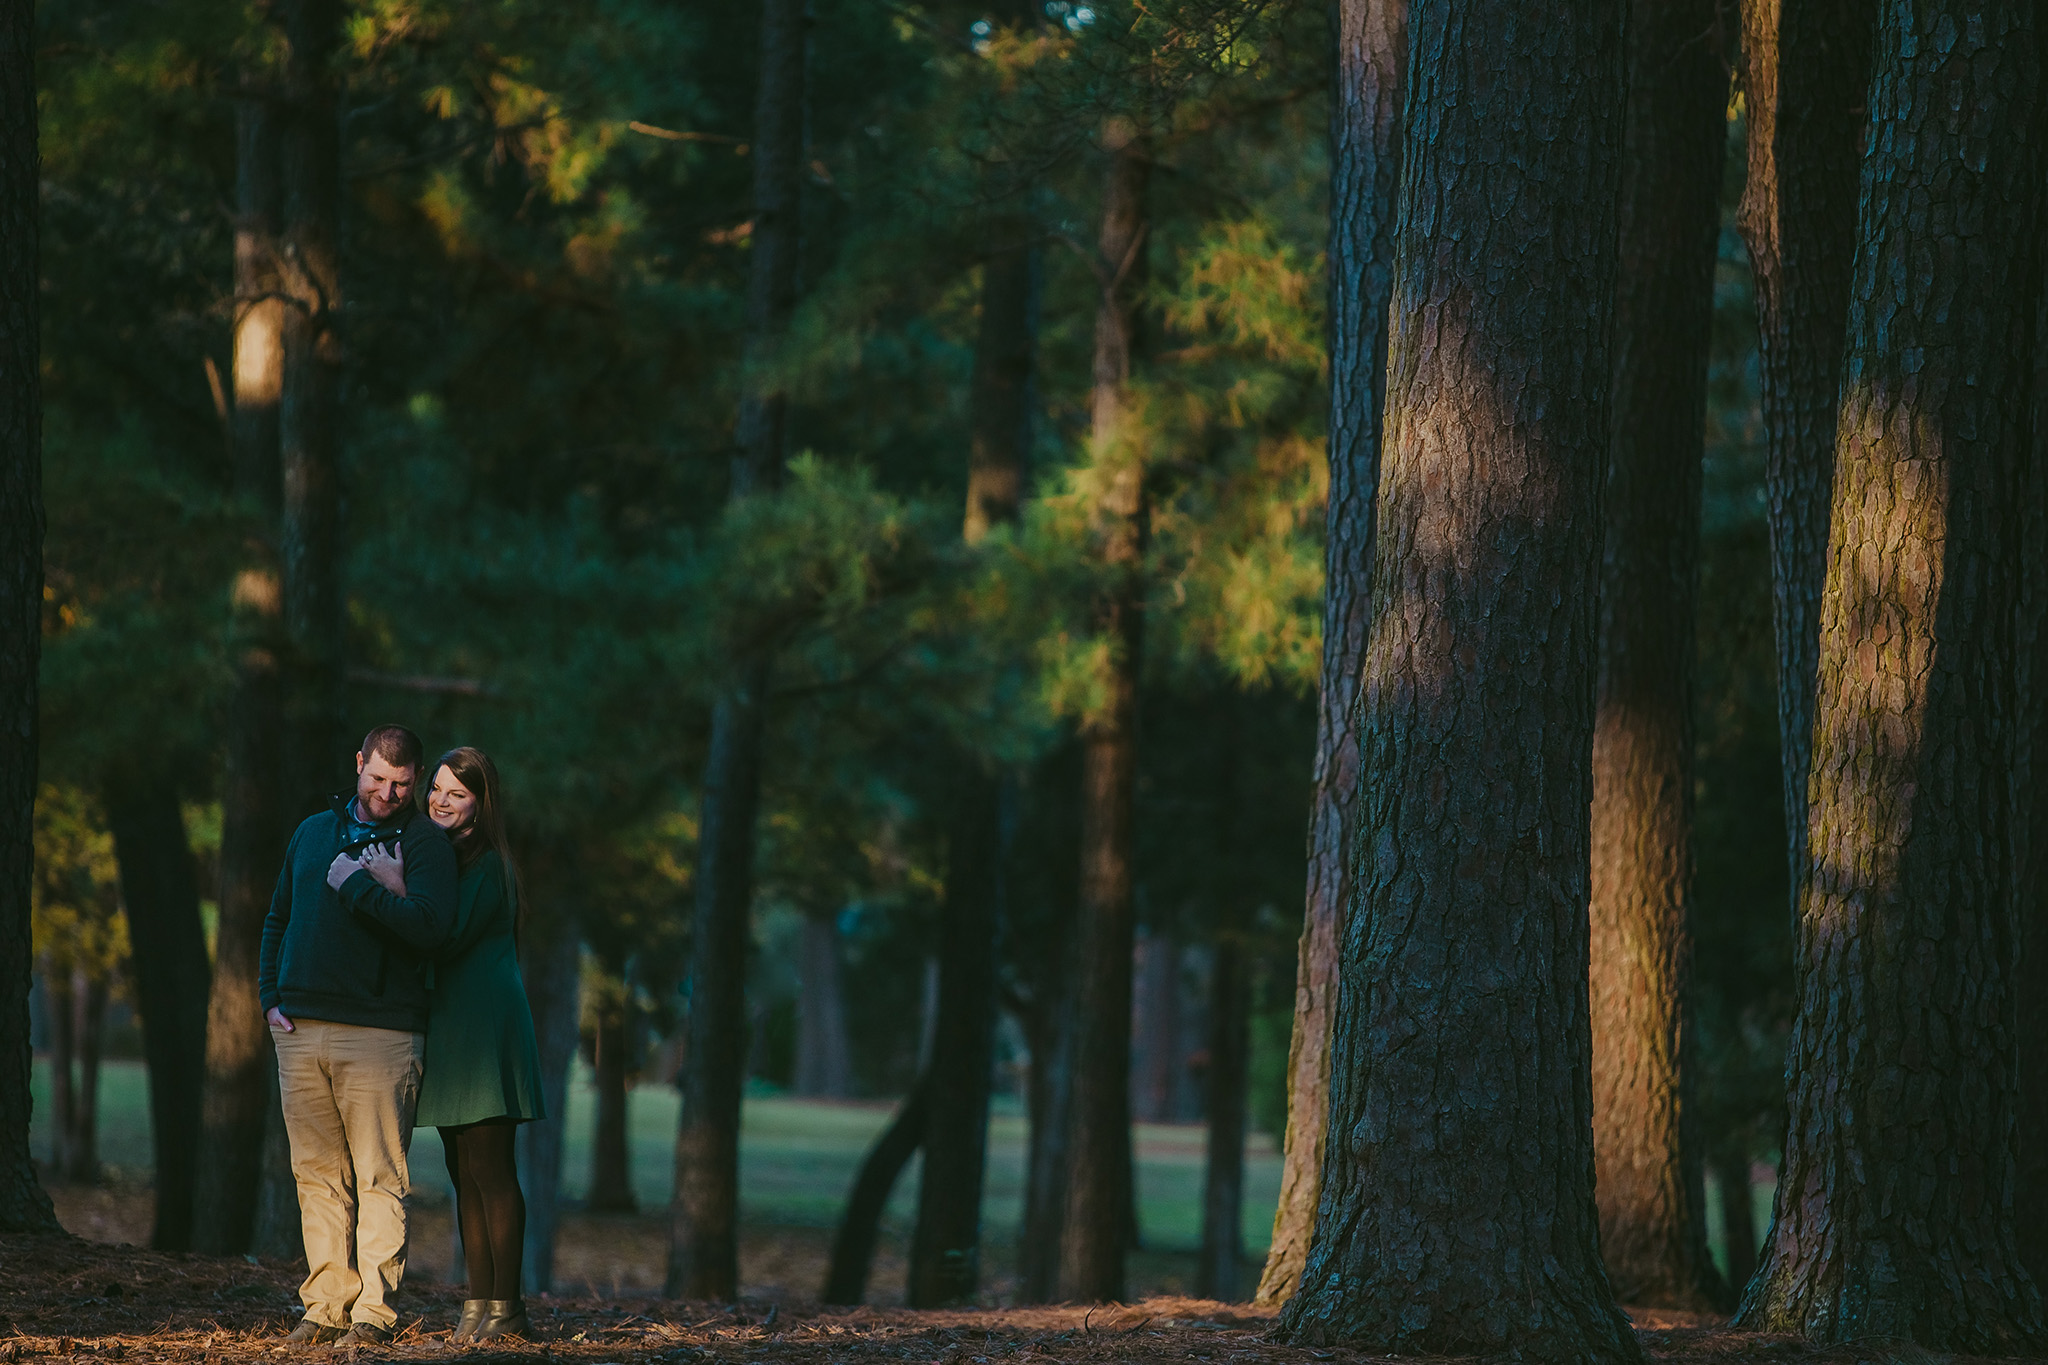 Lauren and Adam snuggle amidst the pines during their engagement session at Mac Anderson park